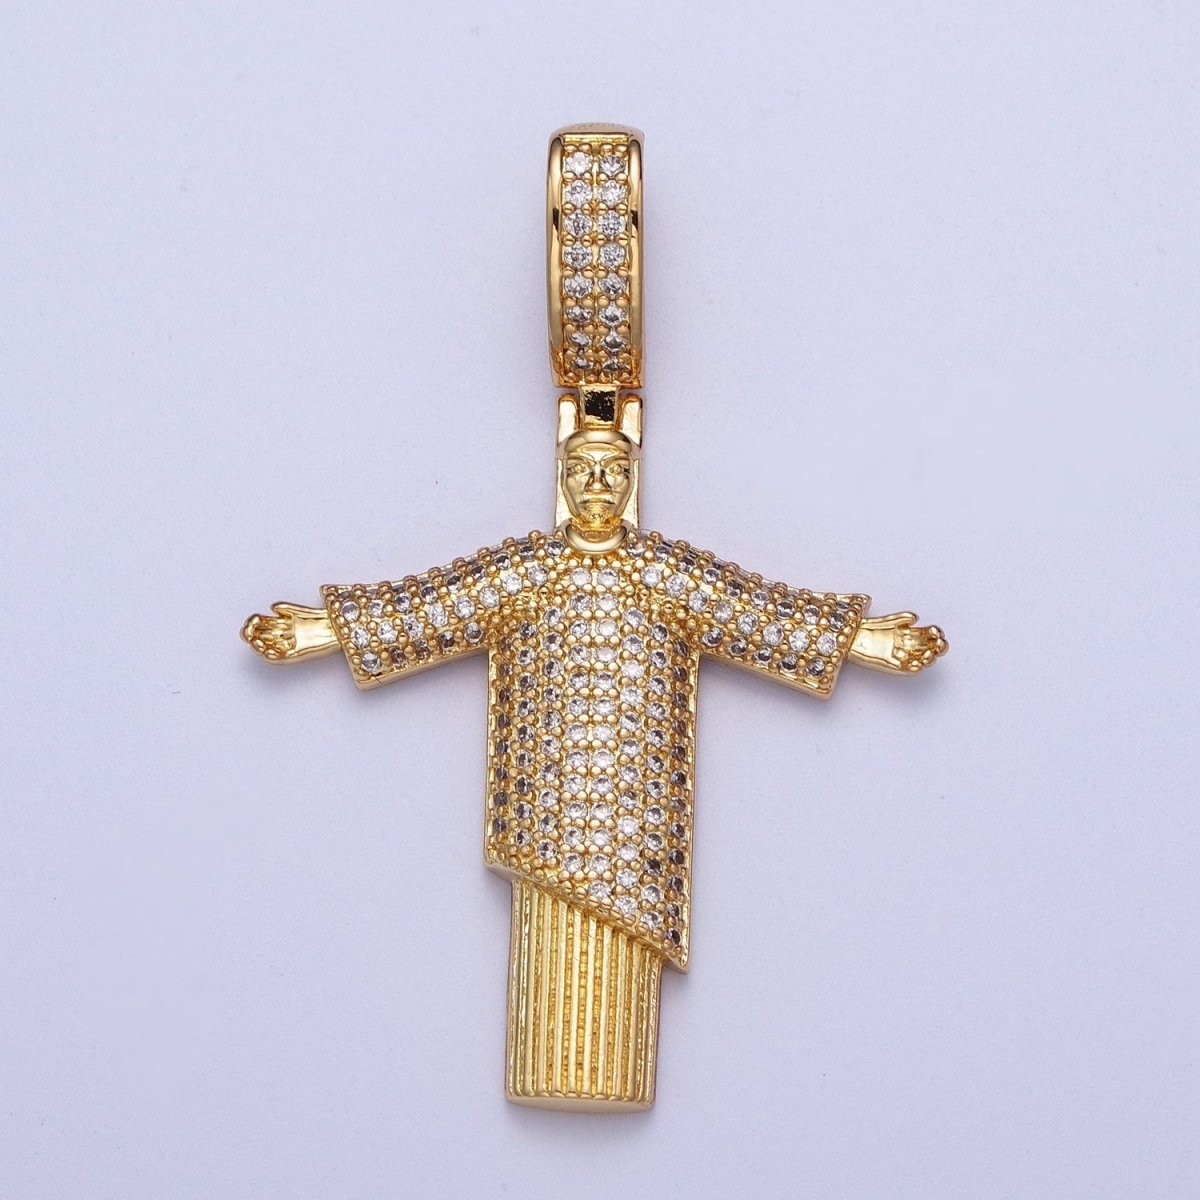 Cubic Gold Christ the Redeemer Statue Pendant for Necklace Component Religious Jewelry Supply X-535 - DLUXCA